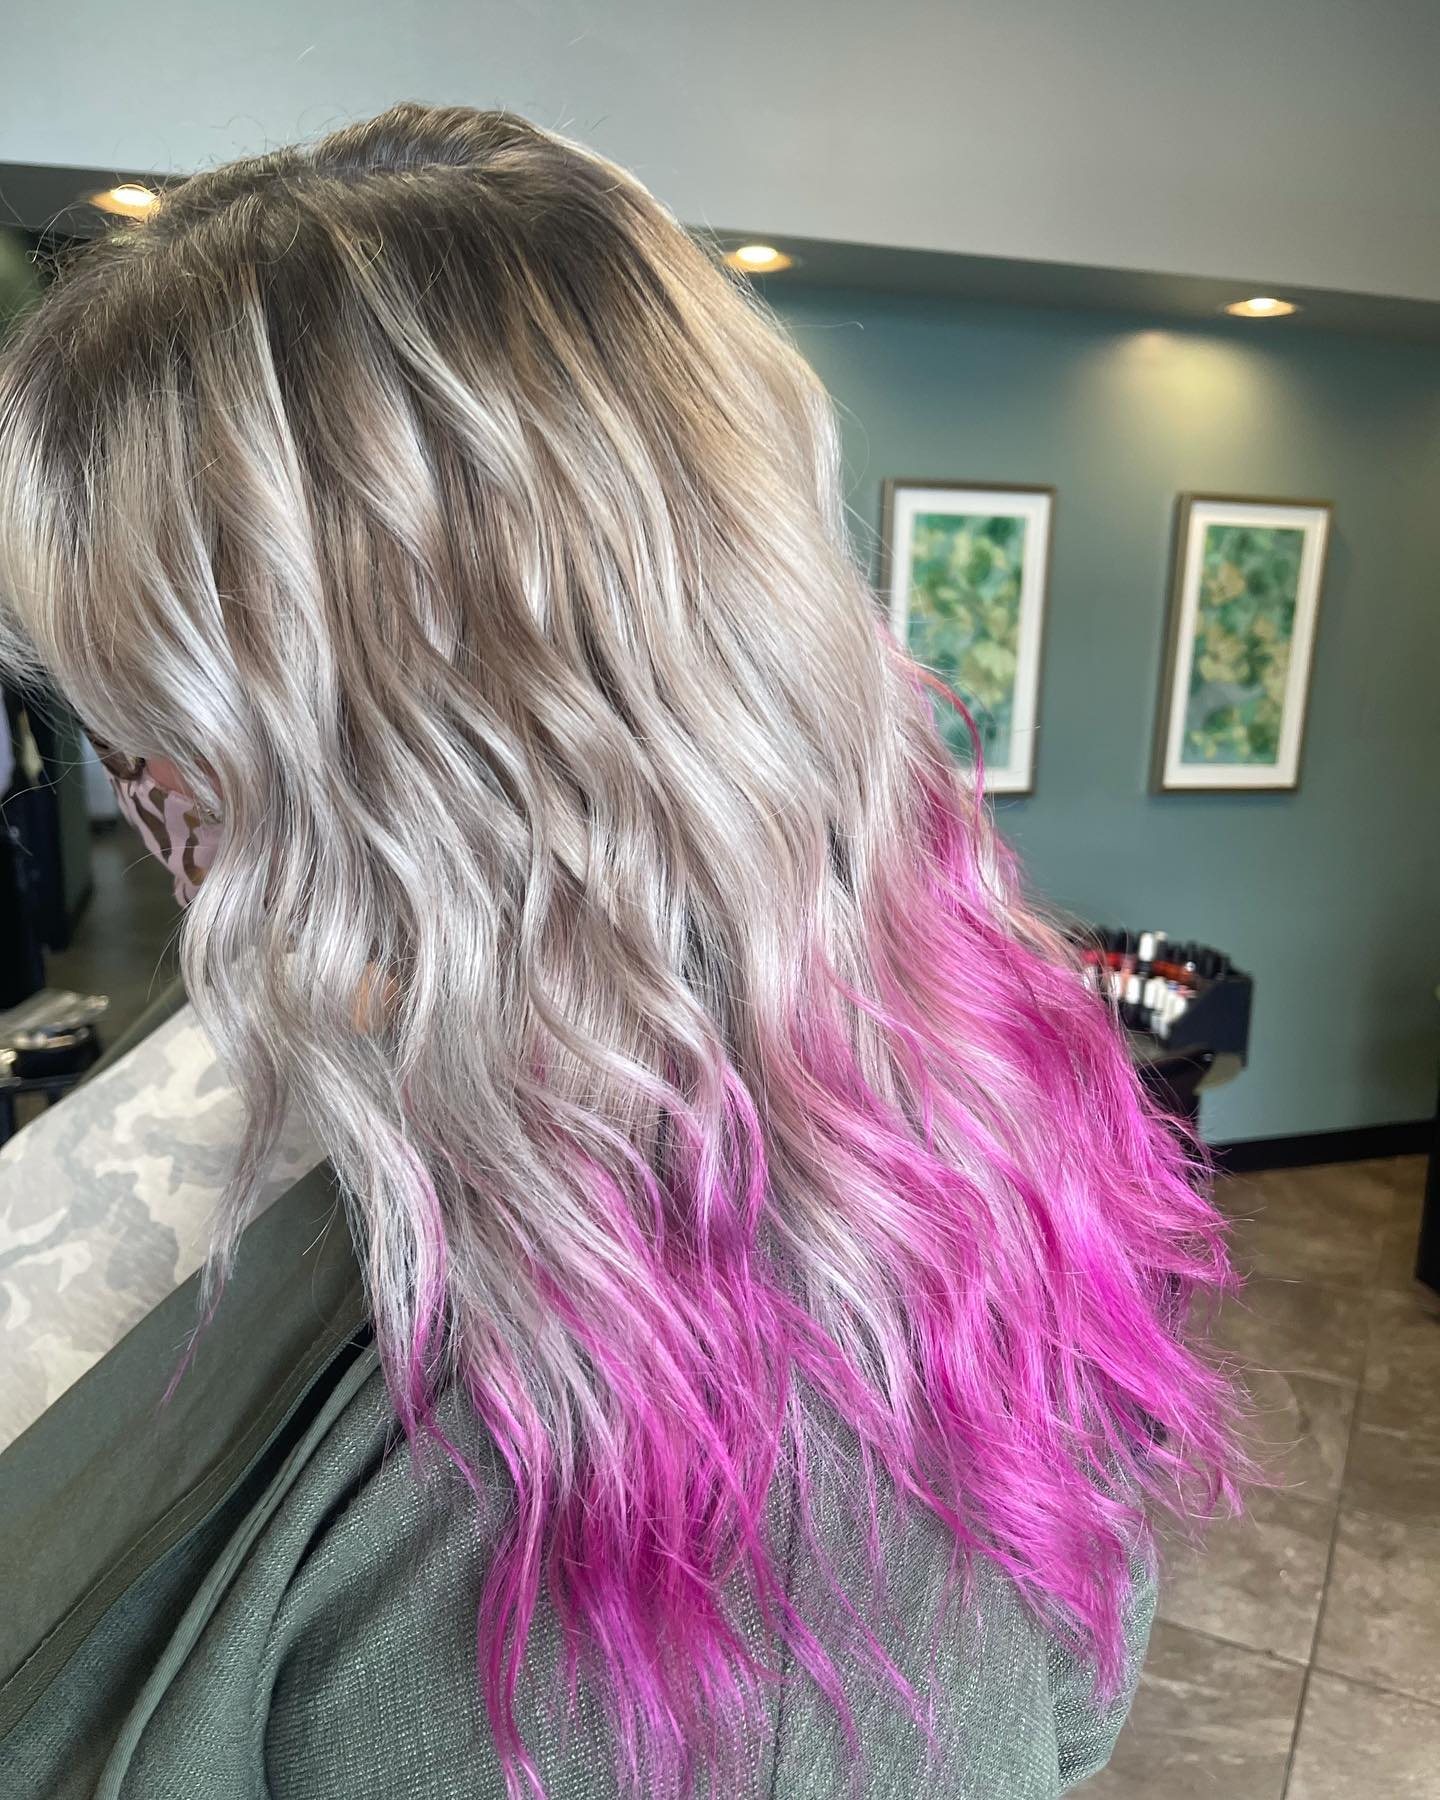 pink ombre hair color 21 Ombre pink hair blonde | Pastel pink ombre hair | Pink balayage Hair Pink Ombre Hair Color for Women